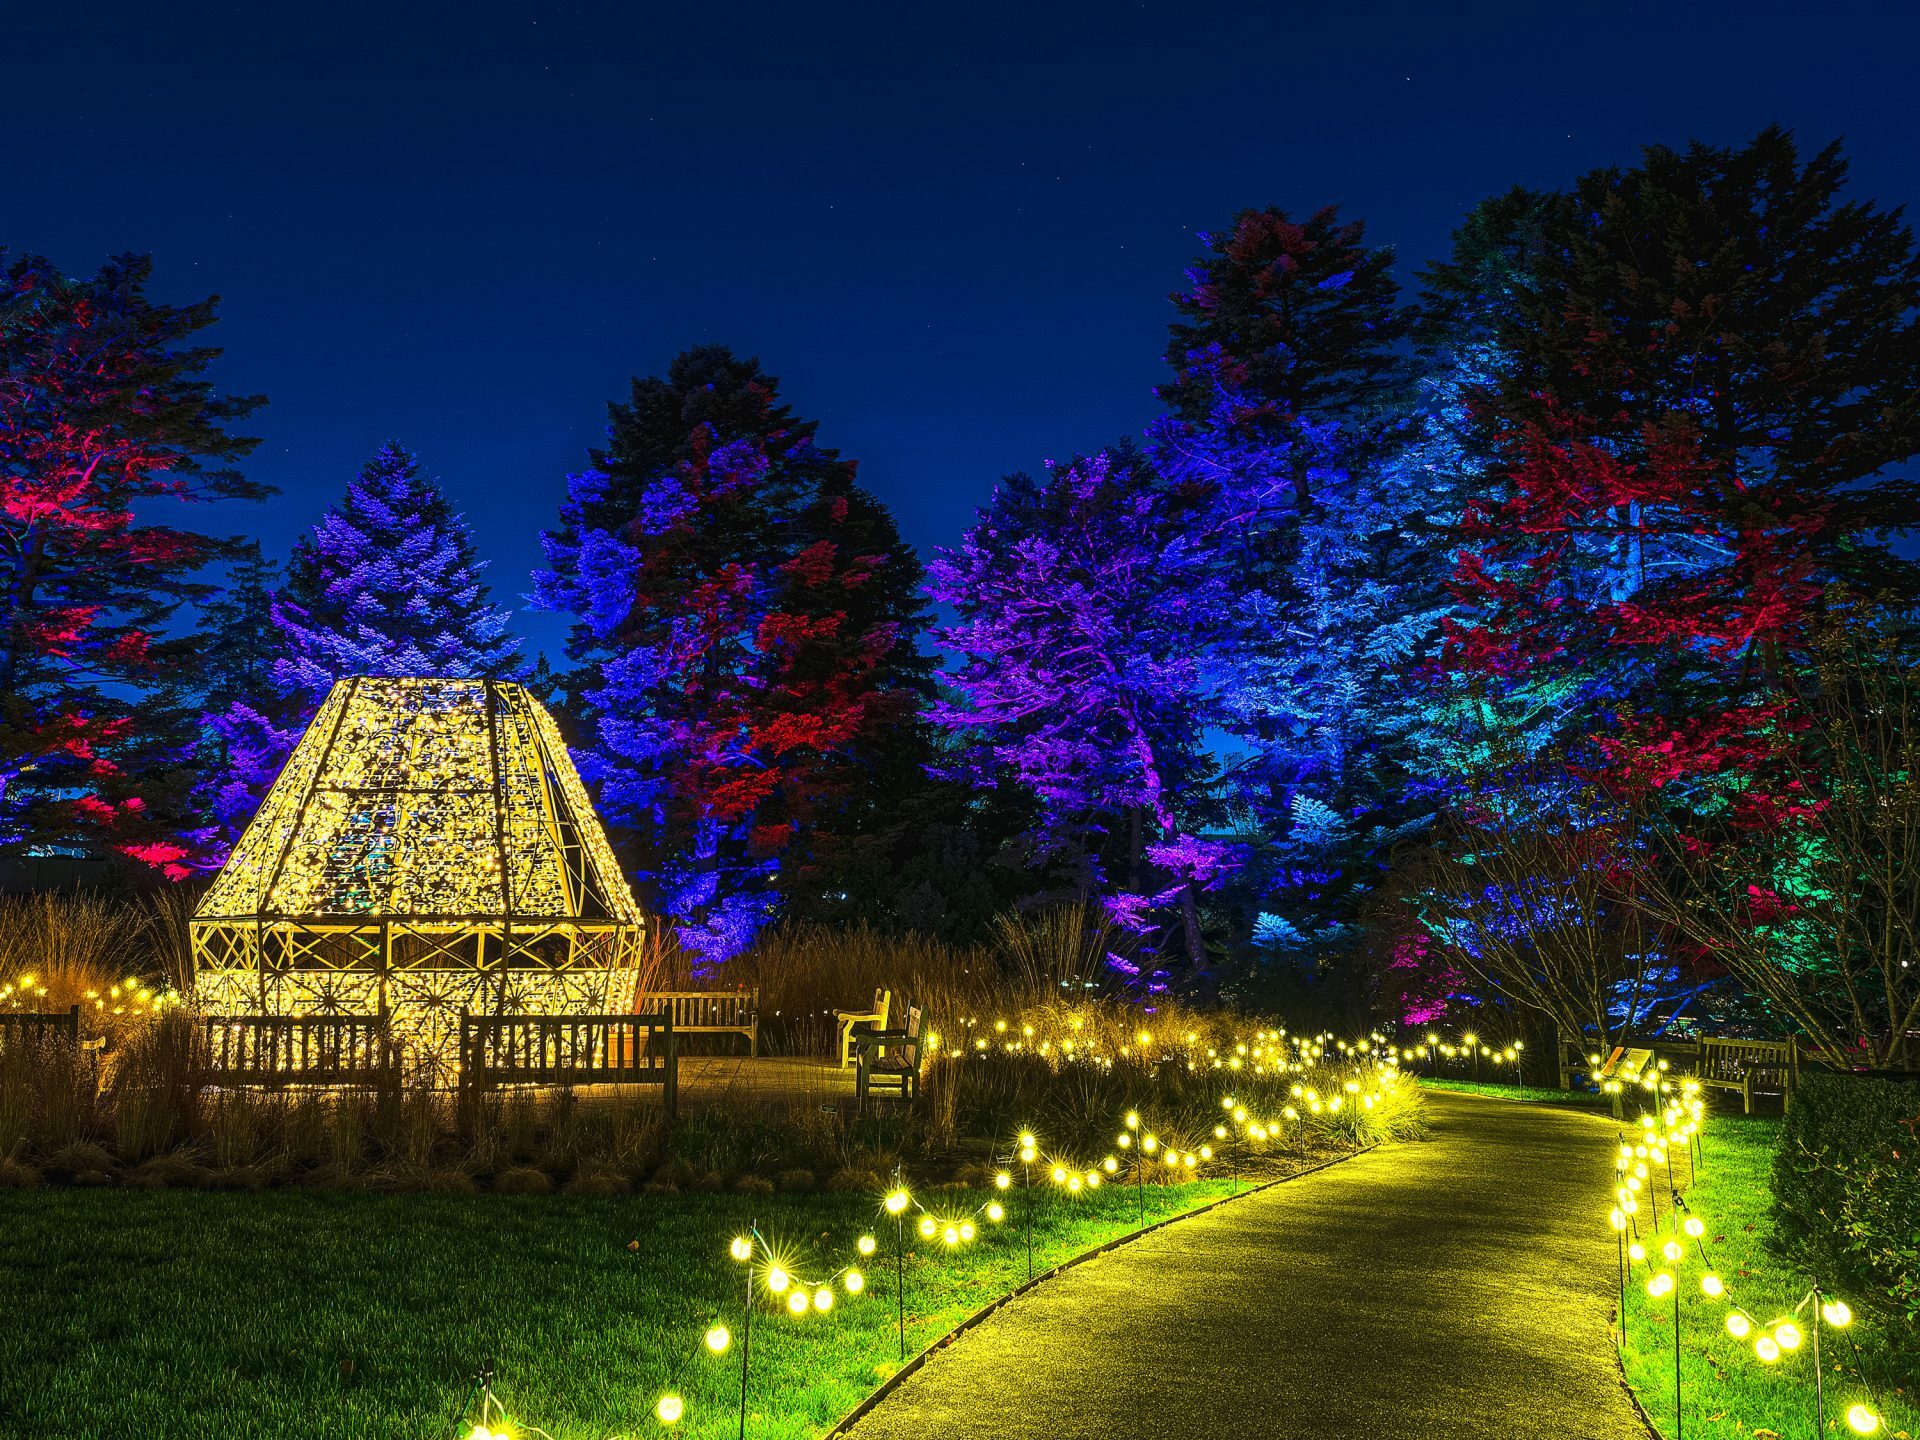 When Does the Season of Enchanting Botanical Garden Lights Conclude?